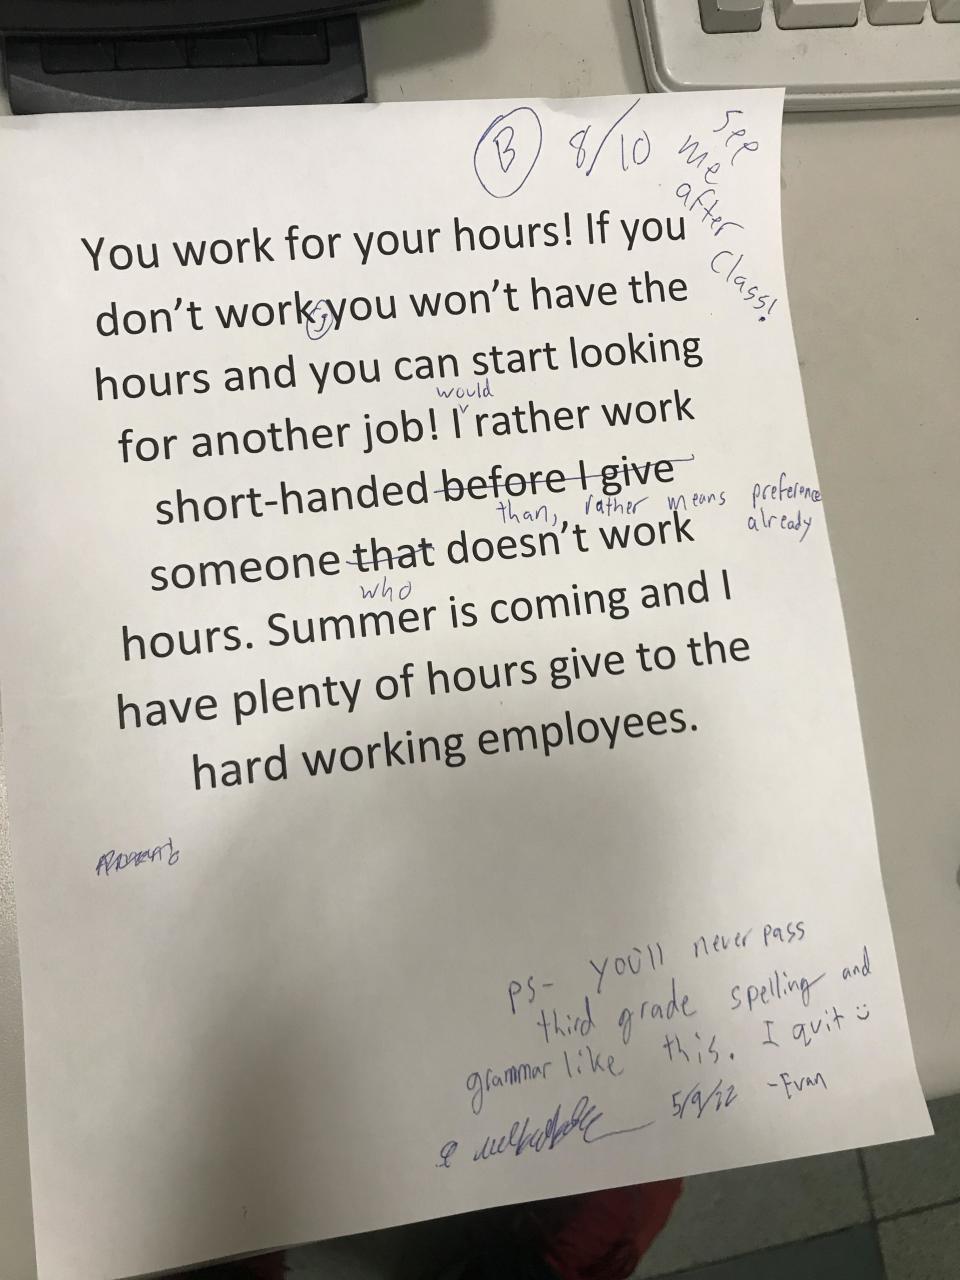 Handwritten note with a message to an employer about staff shortages and hardworking employees, graded B with humorous comments